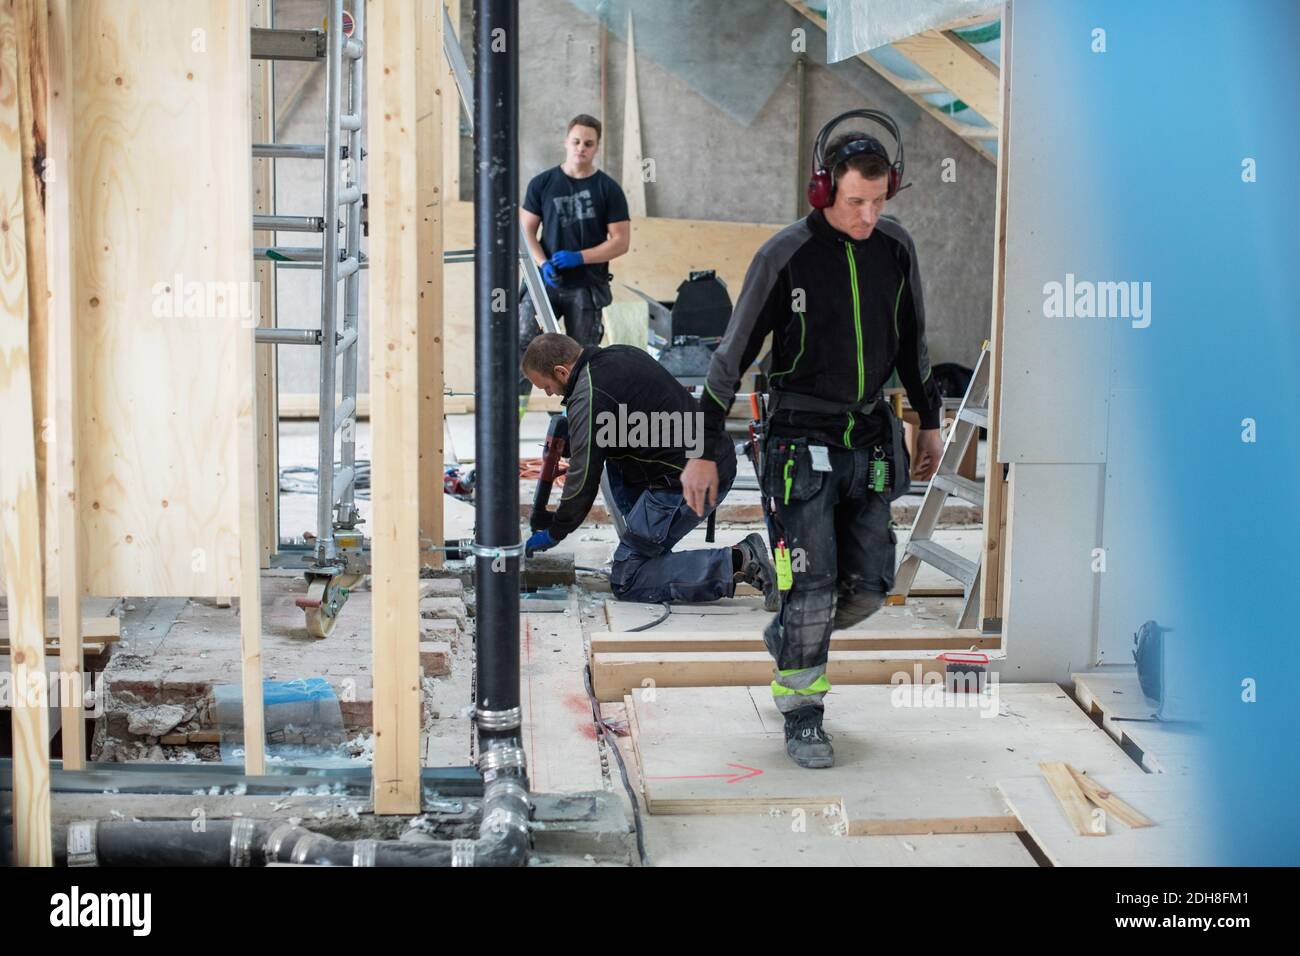 Manual workers working on messy floor at construction site Stock Photo